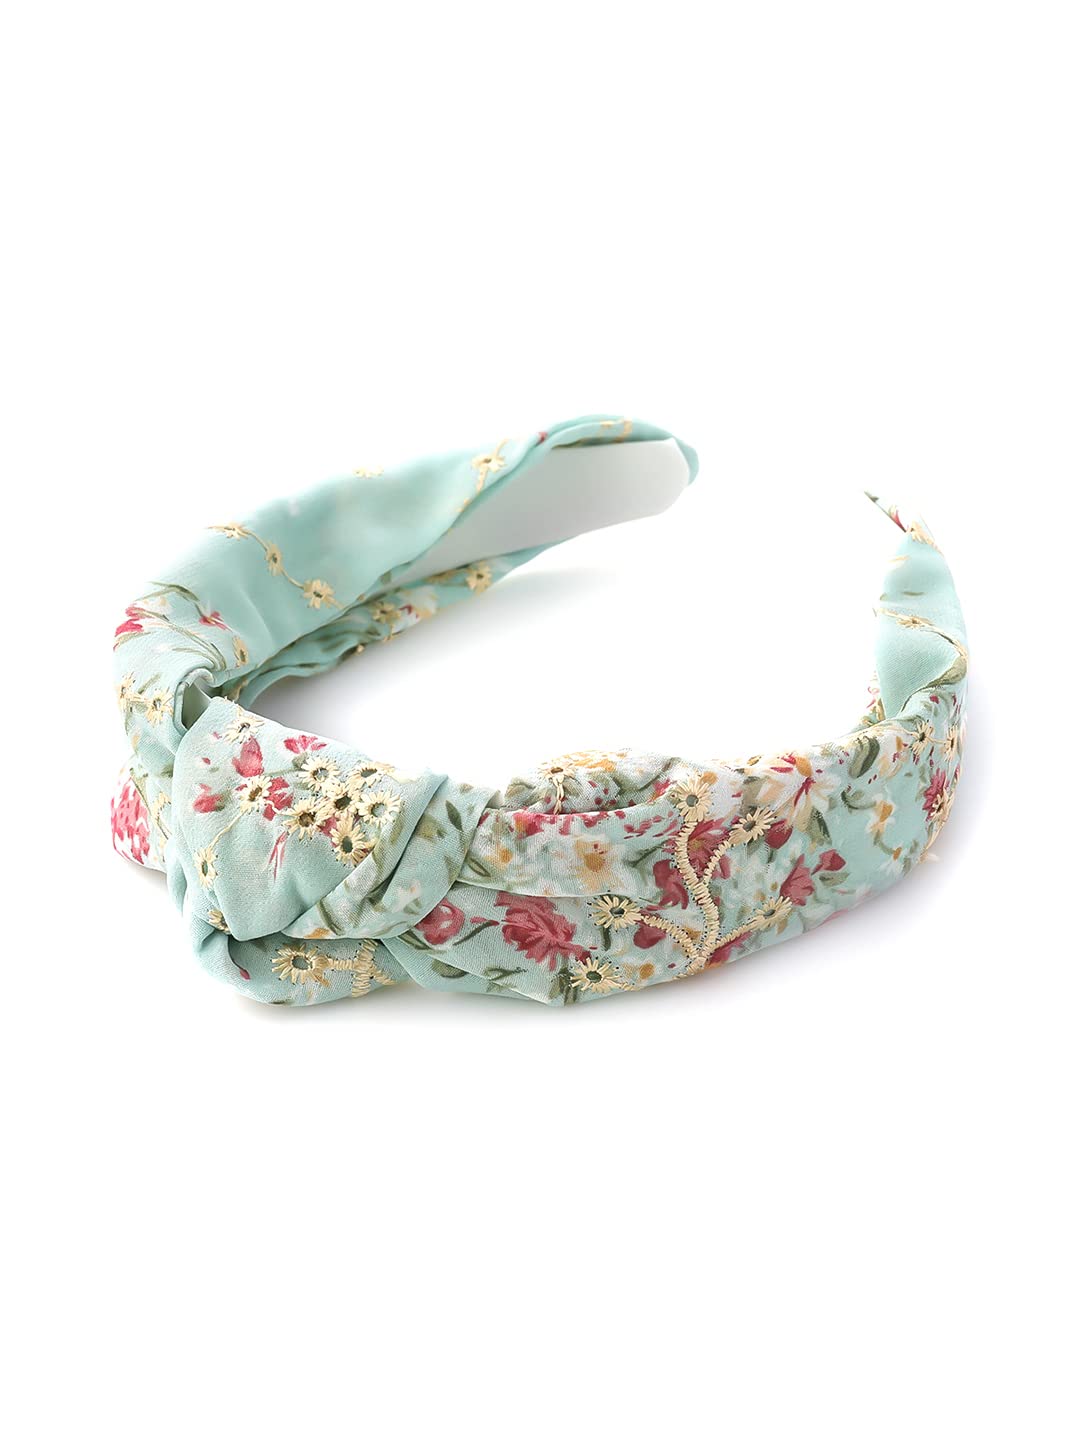 Yellow Chimes Hair Bands for Girls Blue Hairbands for Women Solid Fabric Knot Floral Printed Headband Hairband Hair Accessories for Women and Girls.